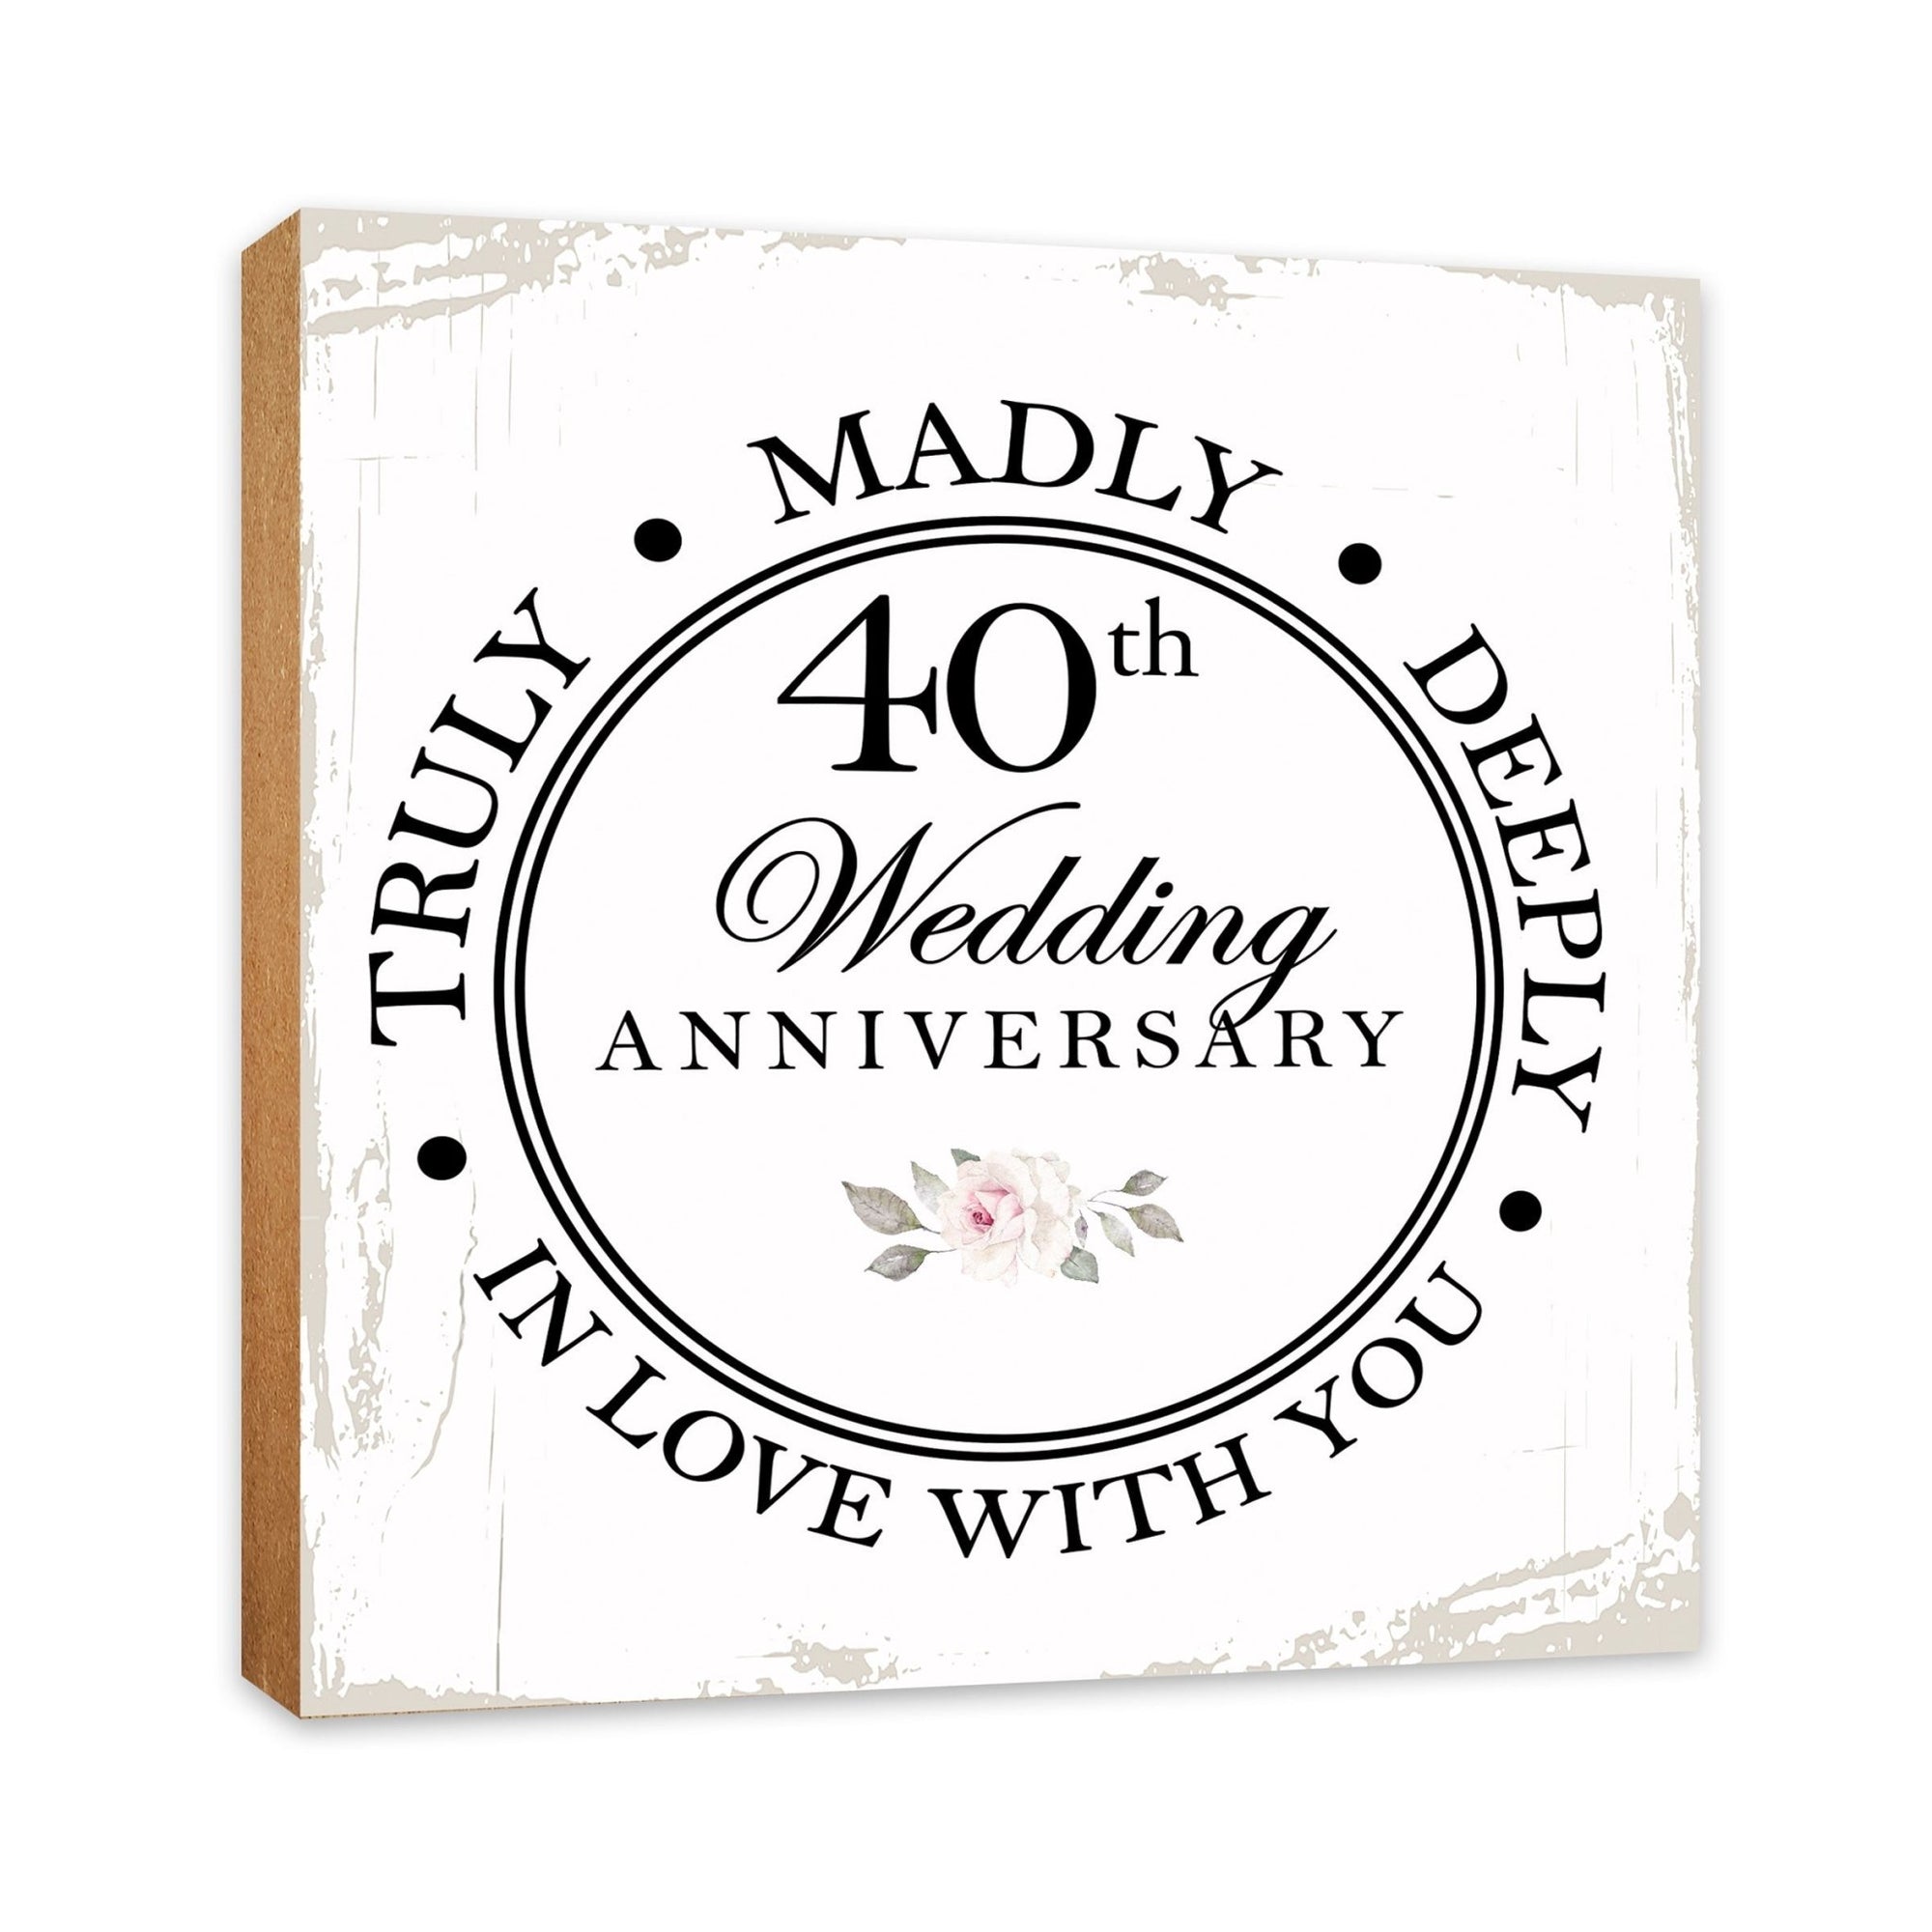 40th Wedding Anniversary Unique Shelf Decor and Tabletop Signs Gift for Couples - In Love With You - LifeSong Milestones